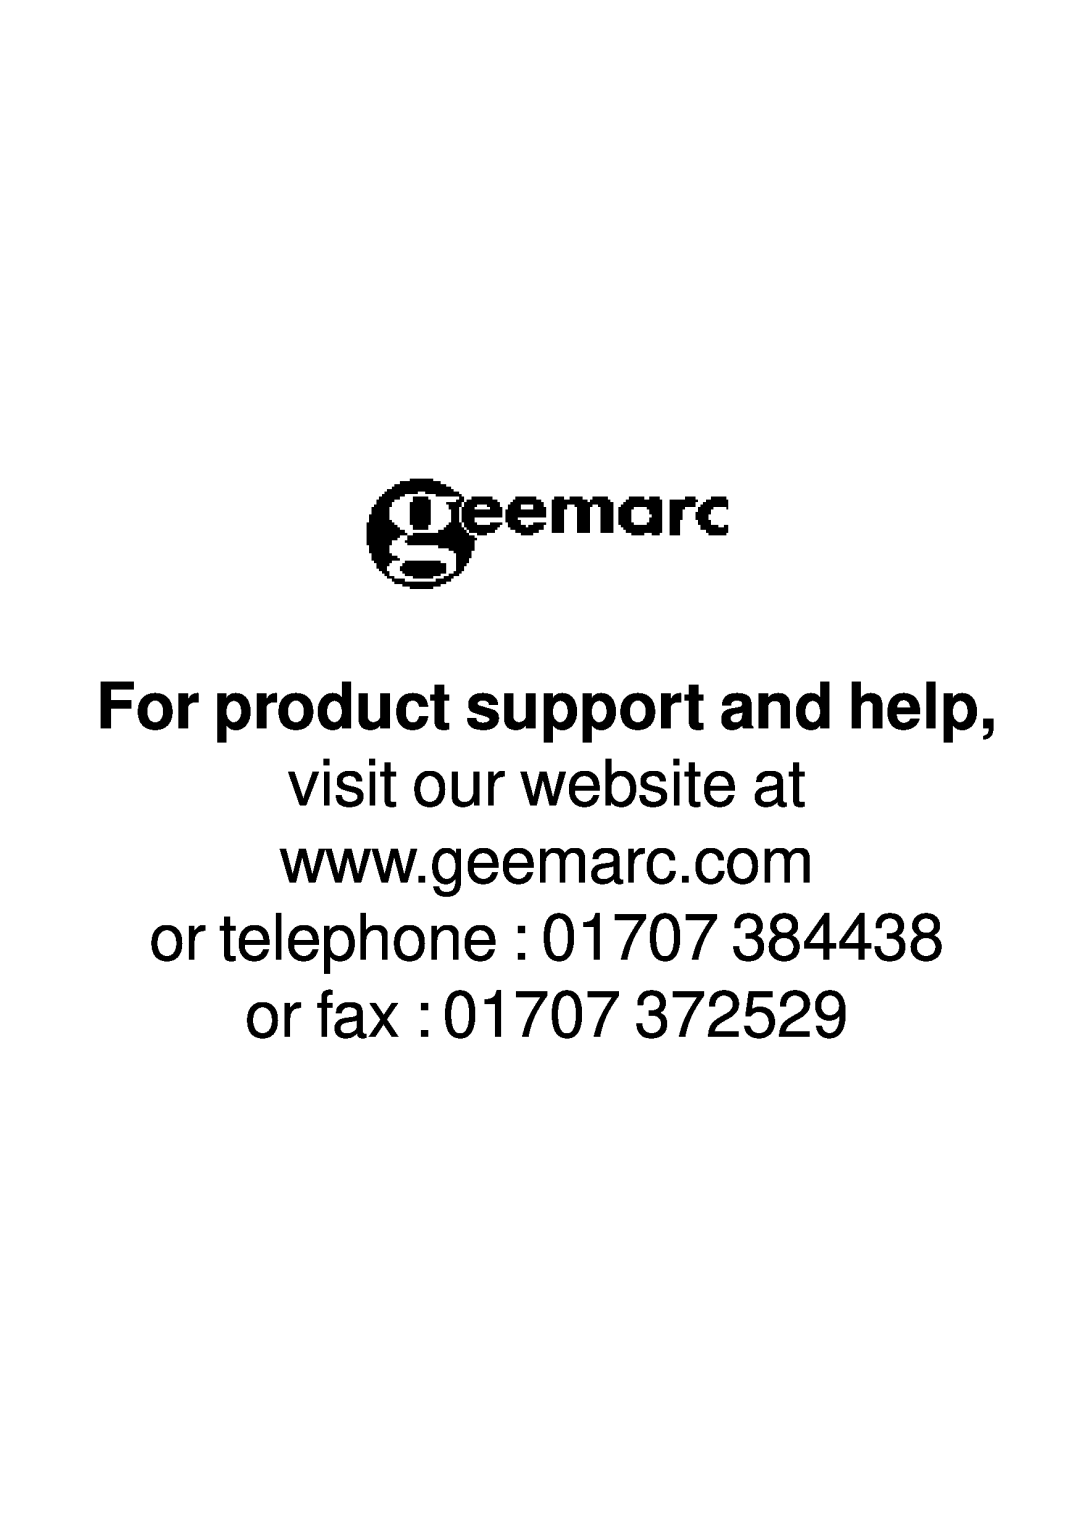 Geemarc RP7510 manual or telephone 01707 or fax 01707, For product support and help 